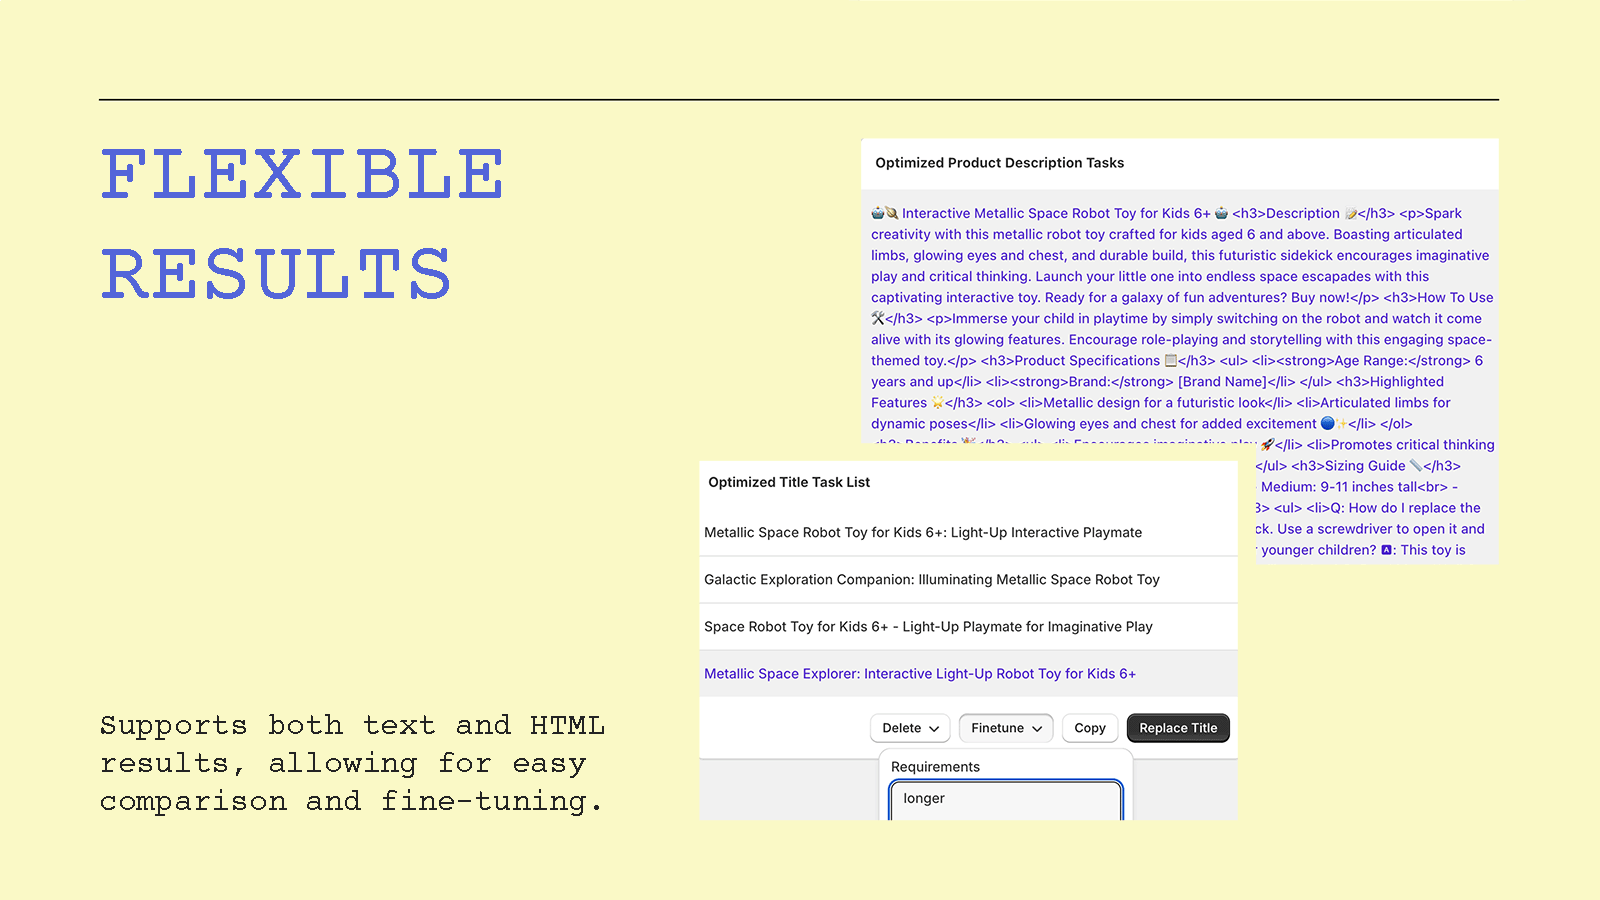 Results in text & HTML for easy comparison.